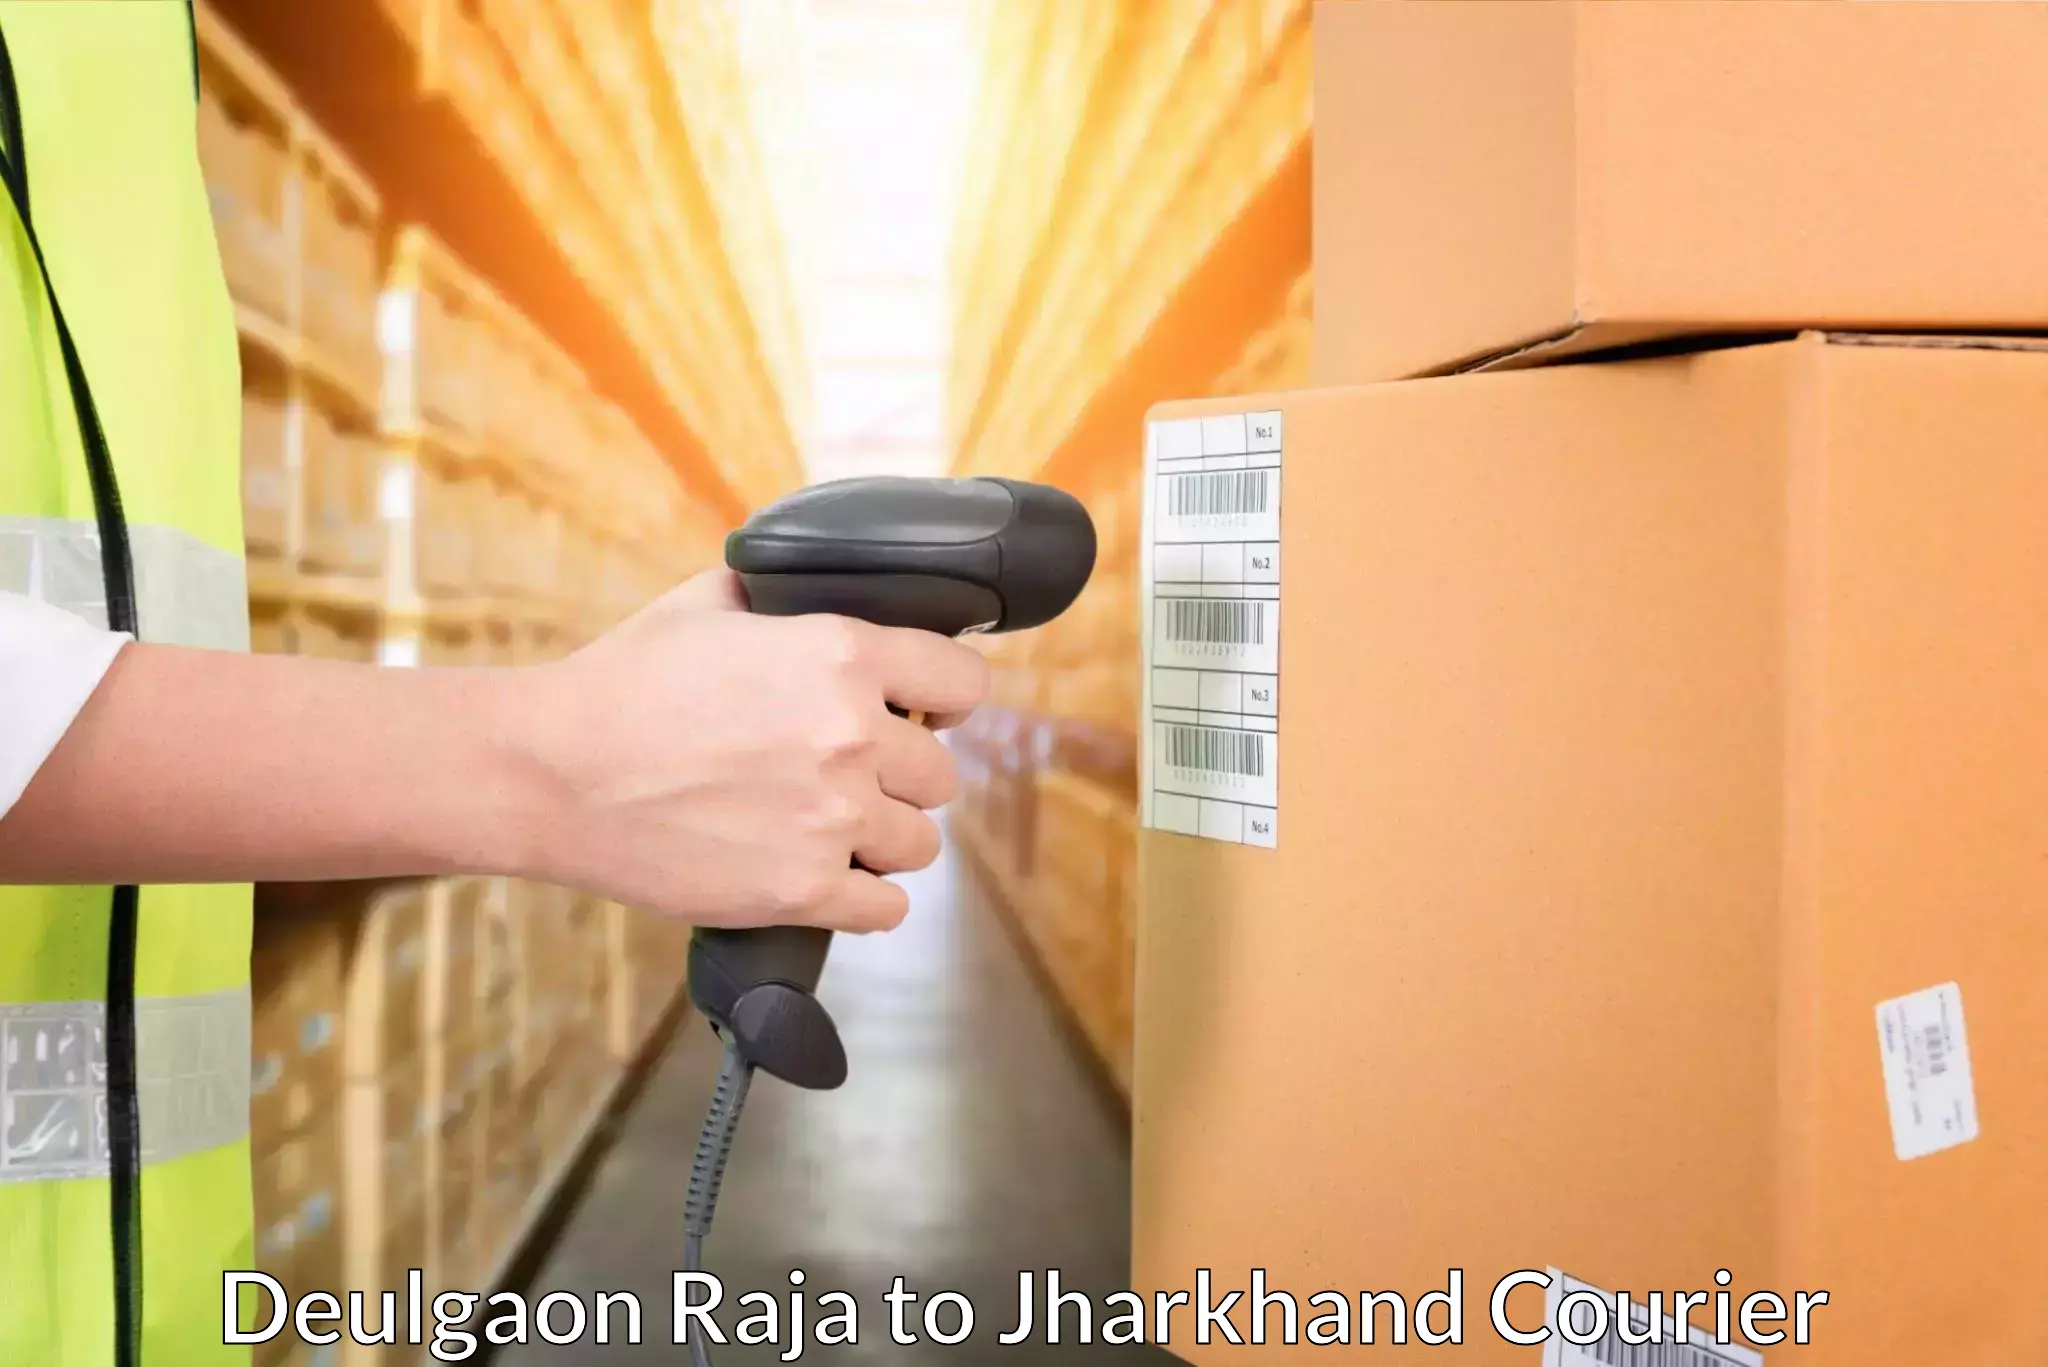 24-hour delivery options Deulgaon Raja to Chandil